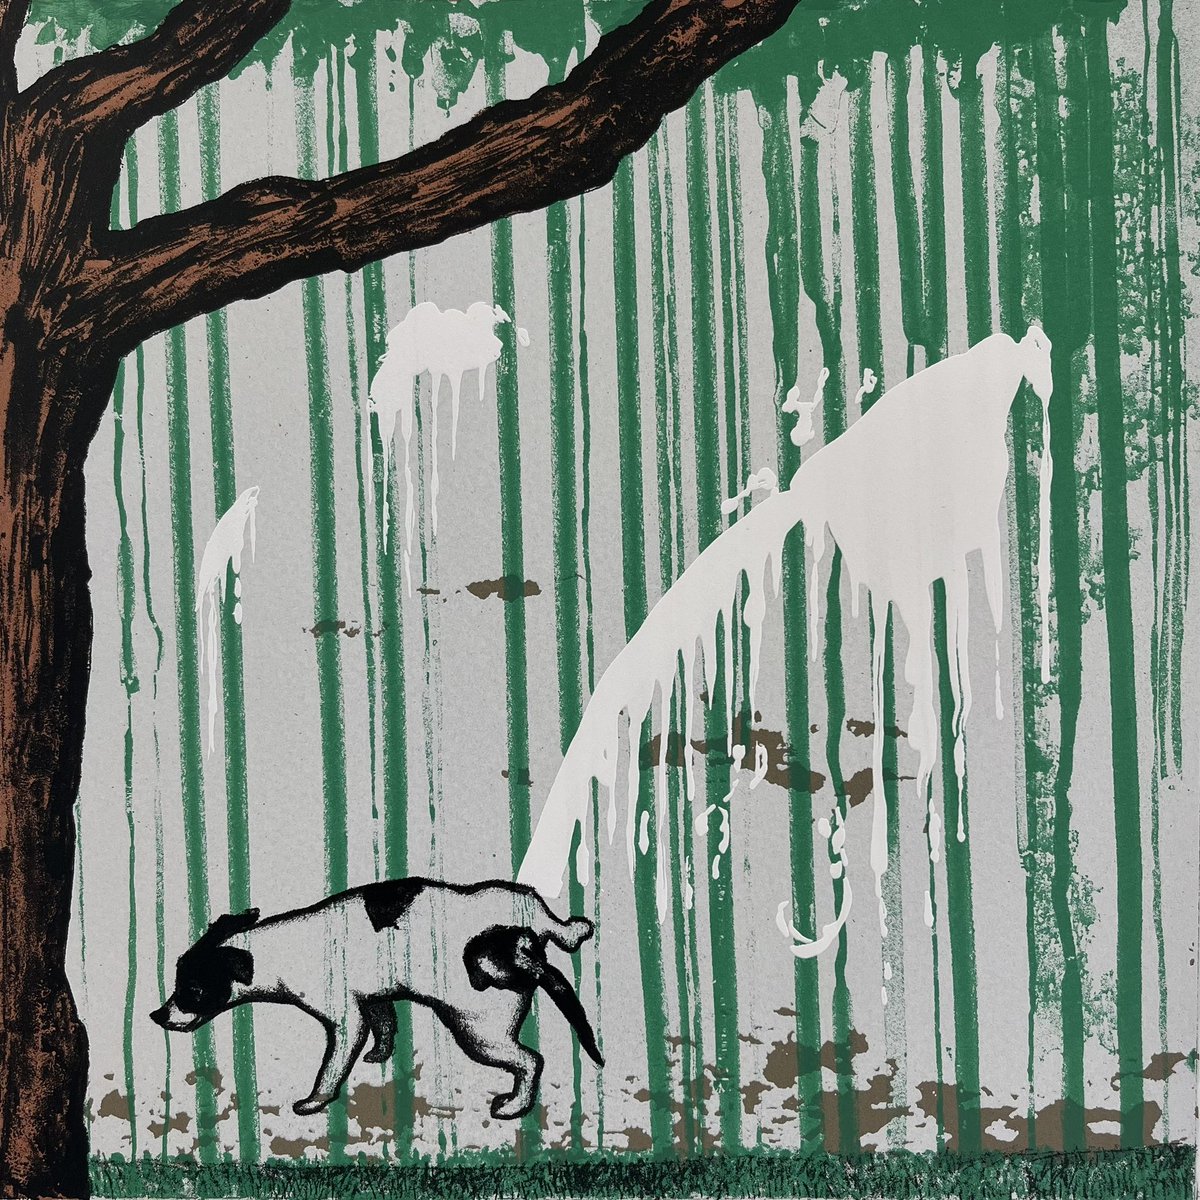 Banksy’s dog - Tree Mural, screenprint This piece occurred to me as a statement against the vandals that Banksy might have come back and covertly made himself. Premiering at @EamesFineArt studio this weekend. @theprintblock #bansysdog #banksy #treemural #banksytreemural